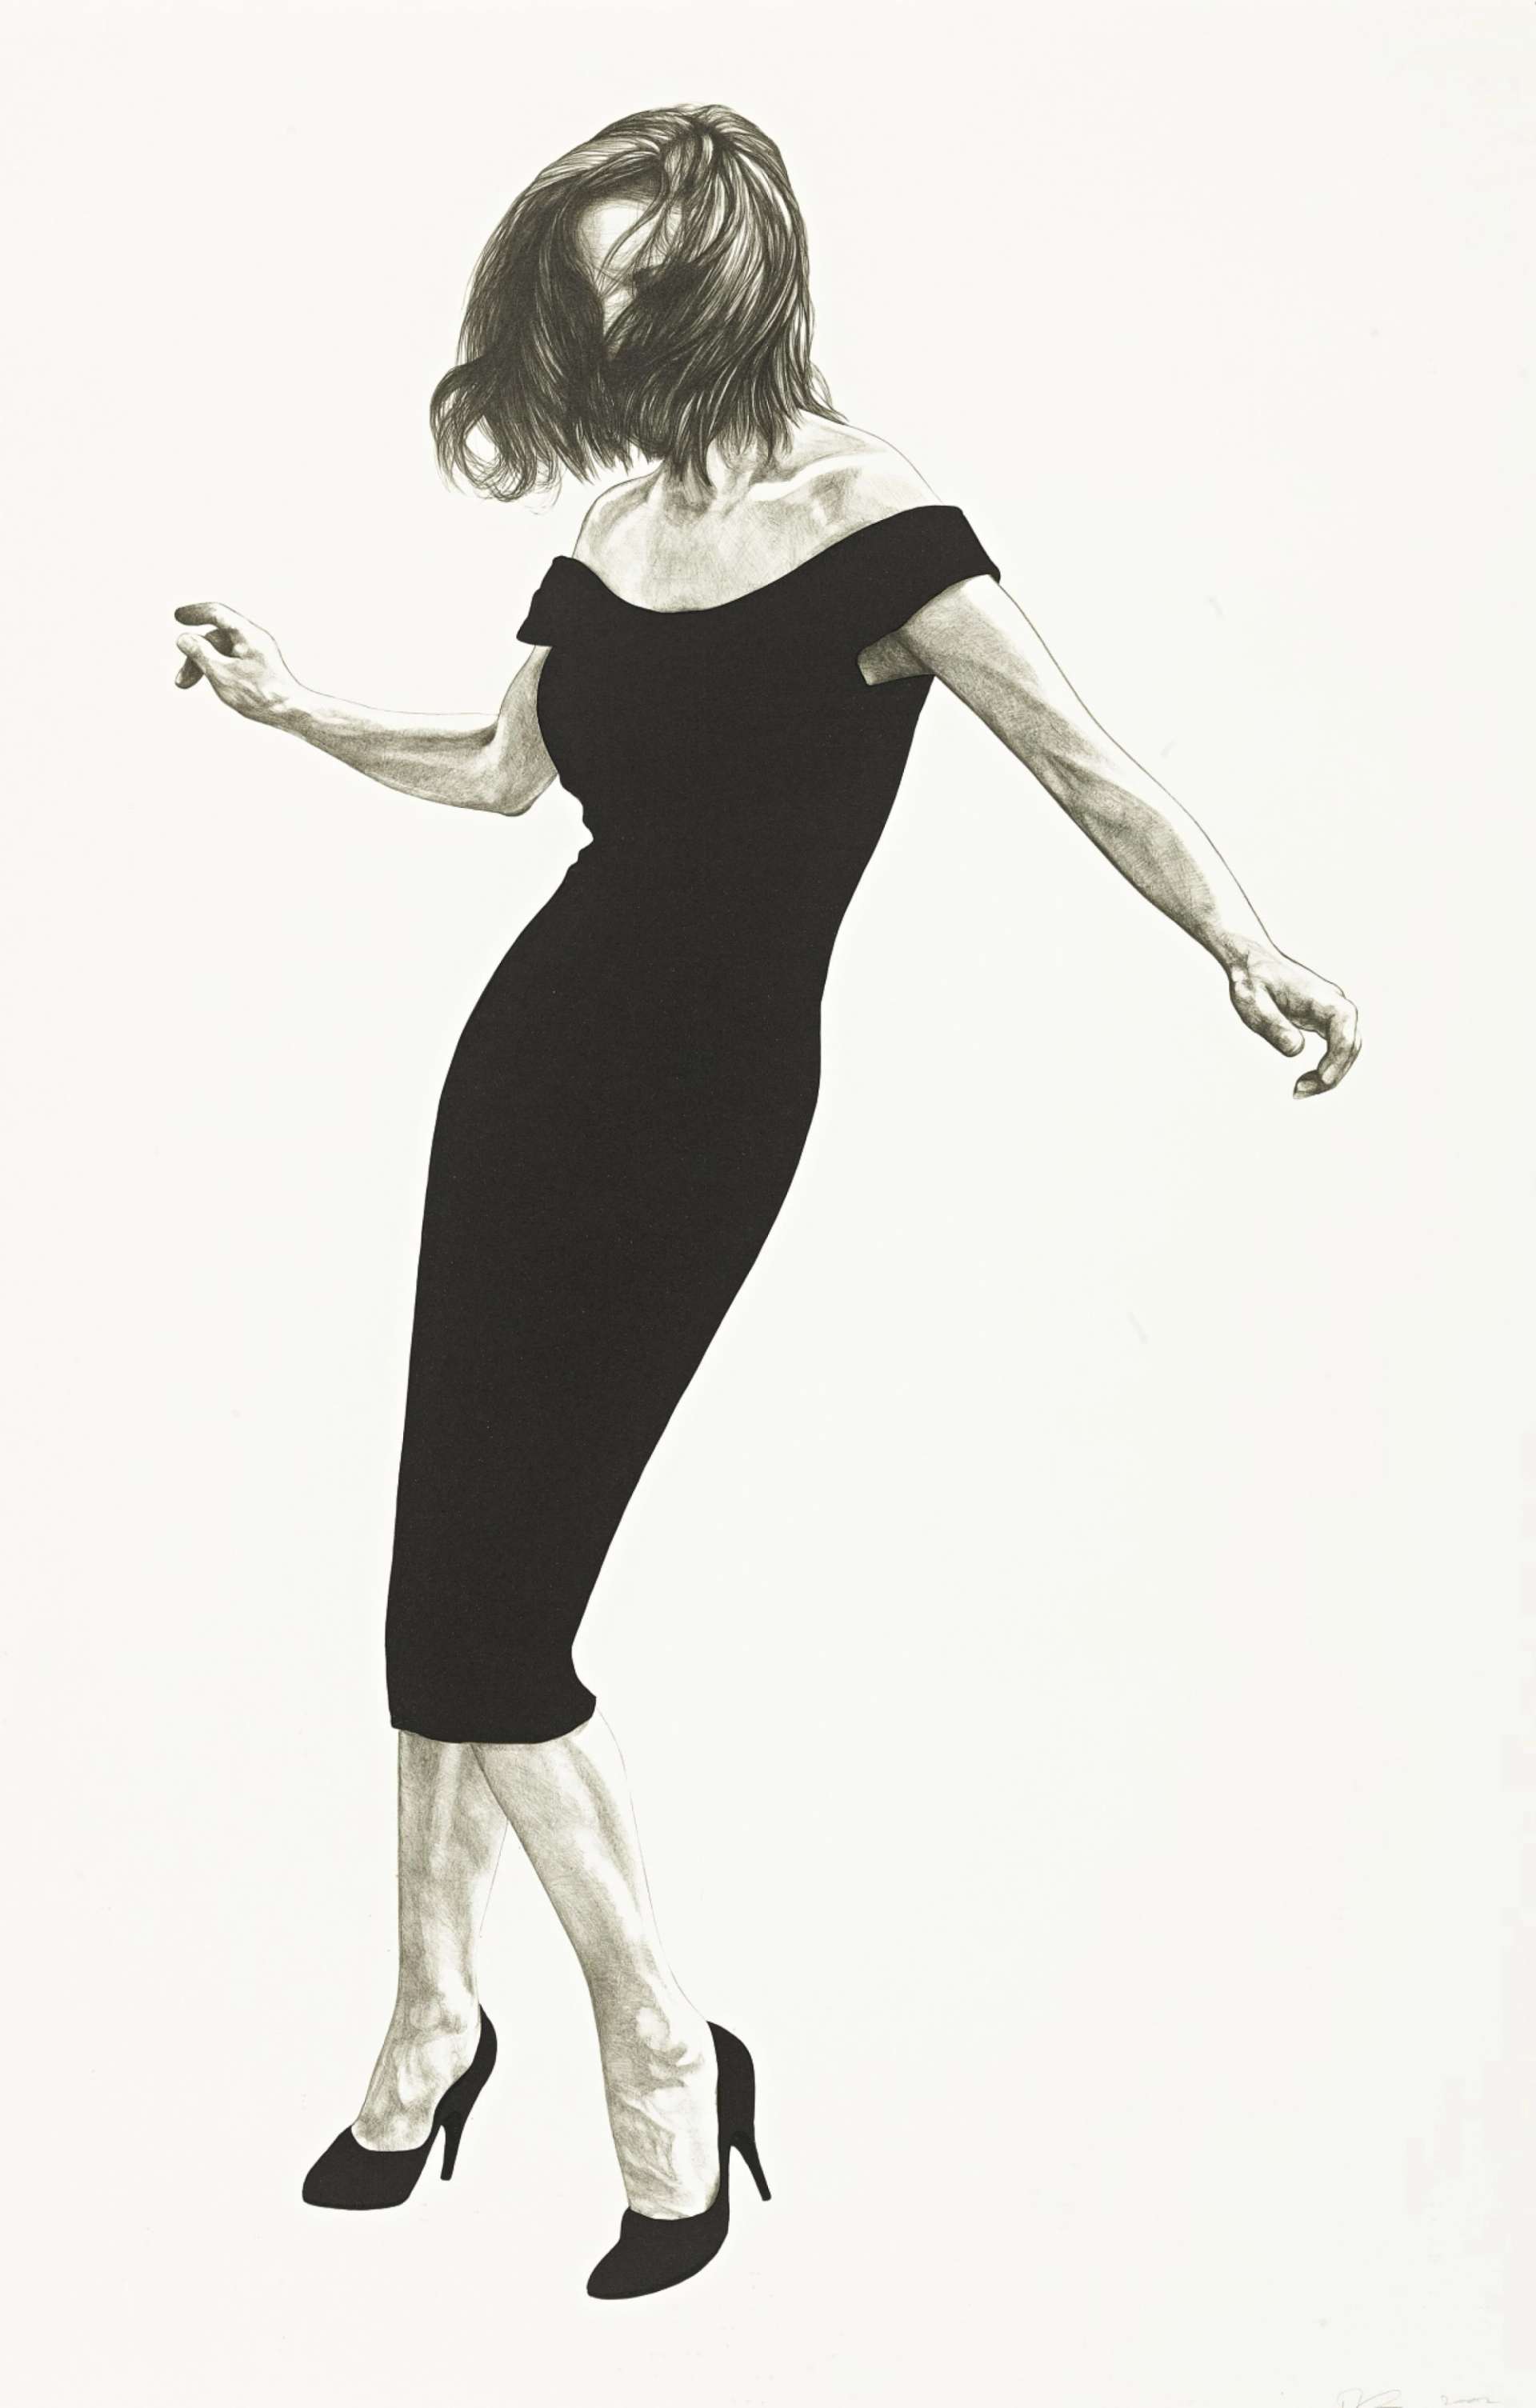 A monochrome lithograph of a woman mid-flip, with her hair obscuring her face, by Robert Longo.